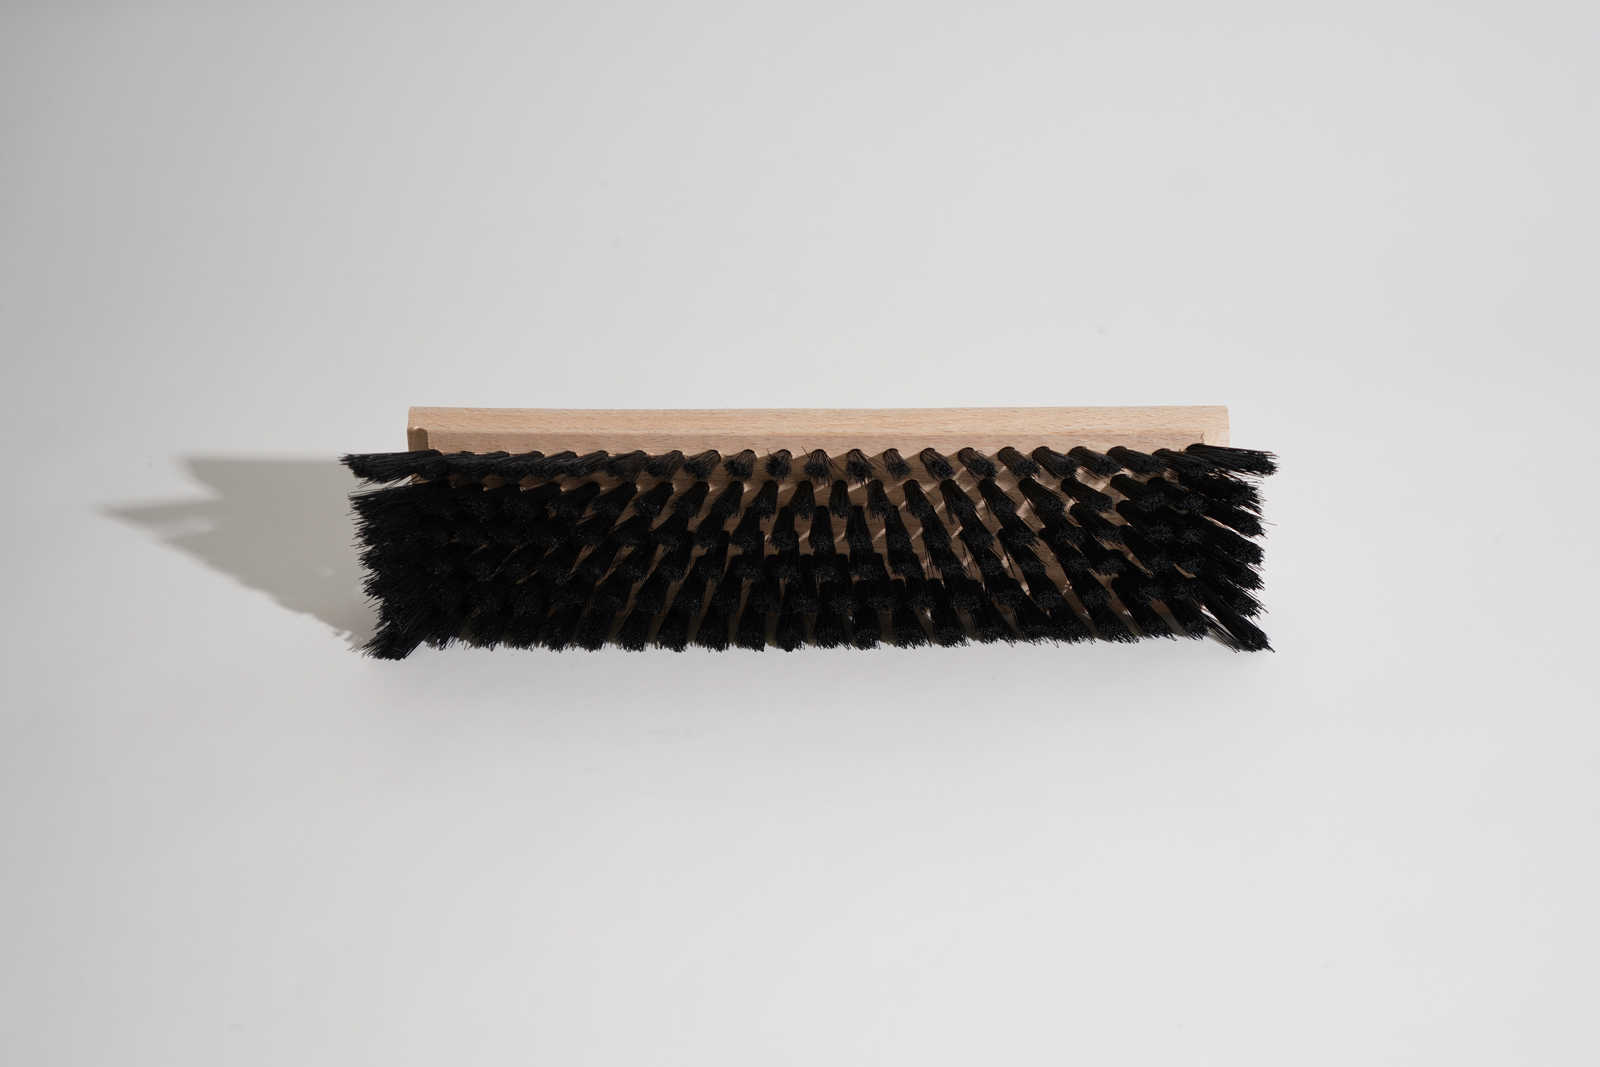             Wallpaper brush 23,5cm x 6cm wood with synthetic bristles
        